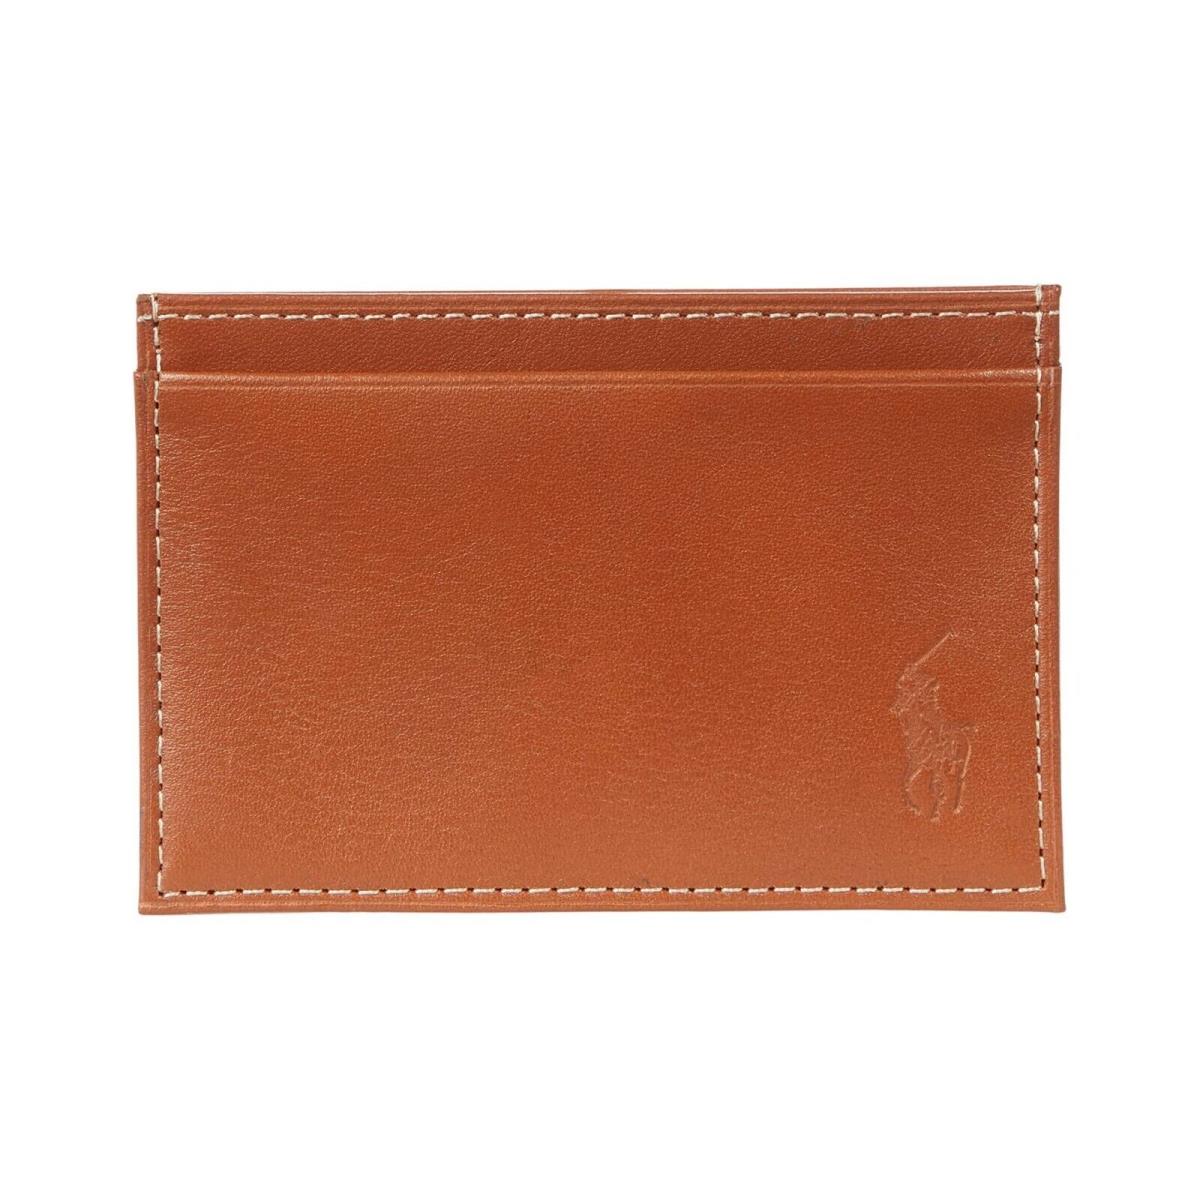 Polo Ralph Lauren Card Case Burnished Leather Wallet Brown -nwt